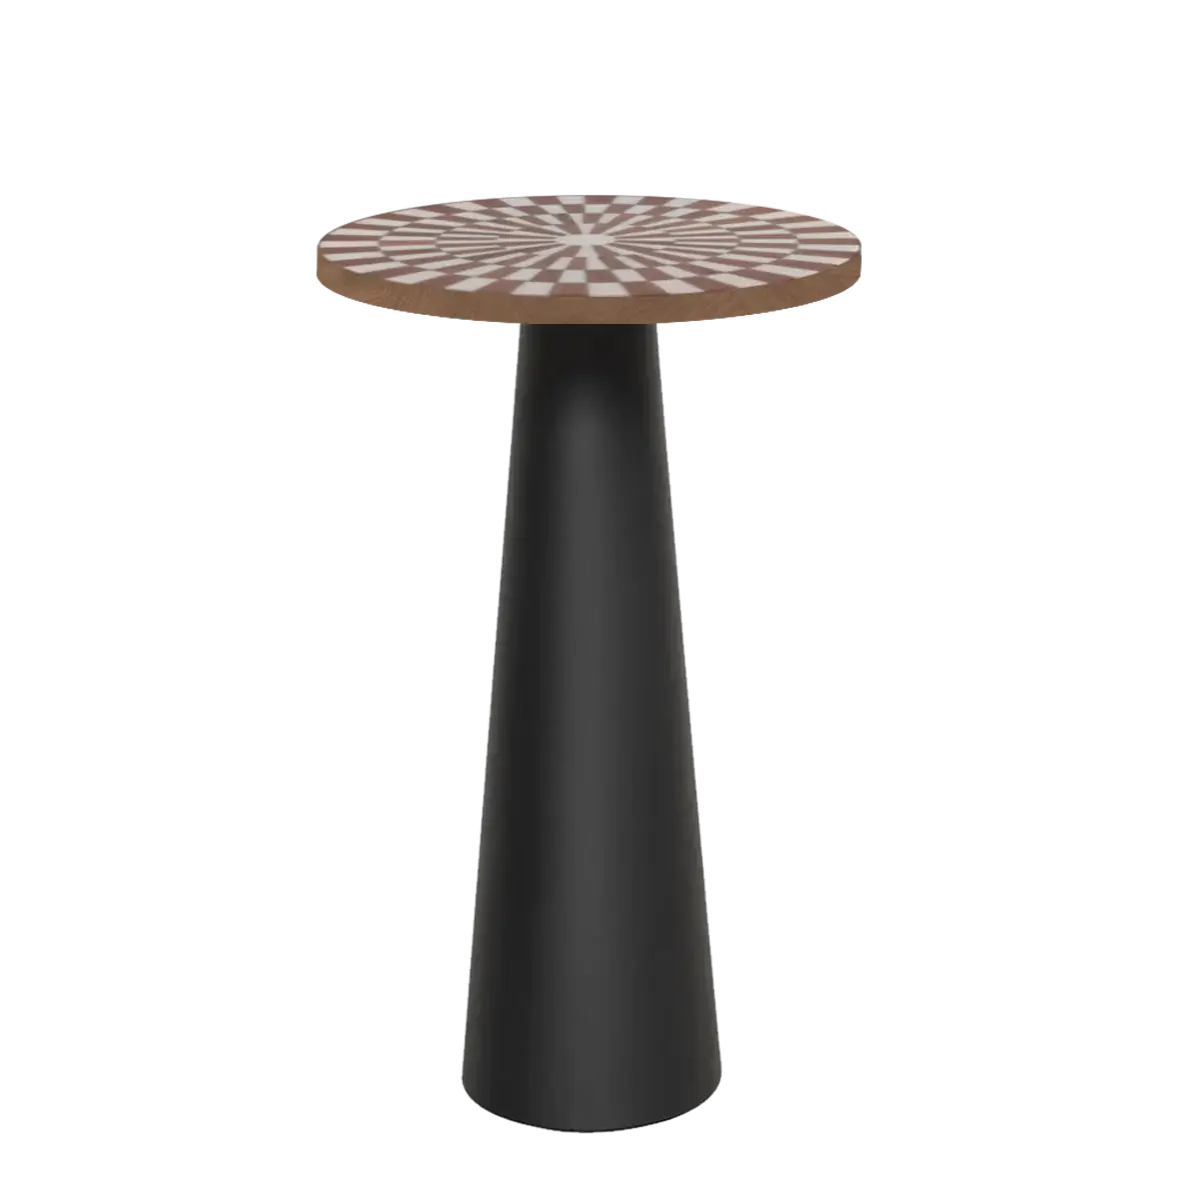 Dounia home Table in Walnut made of Walnut and brass, Model: shaa, Close Up View